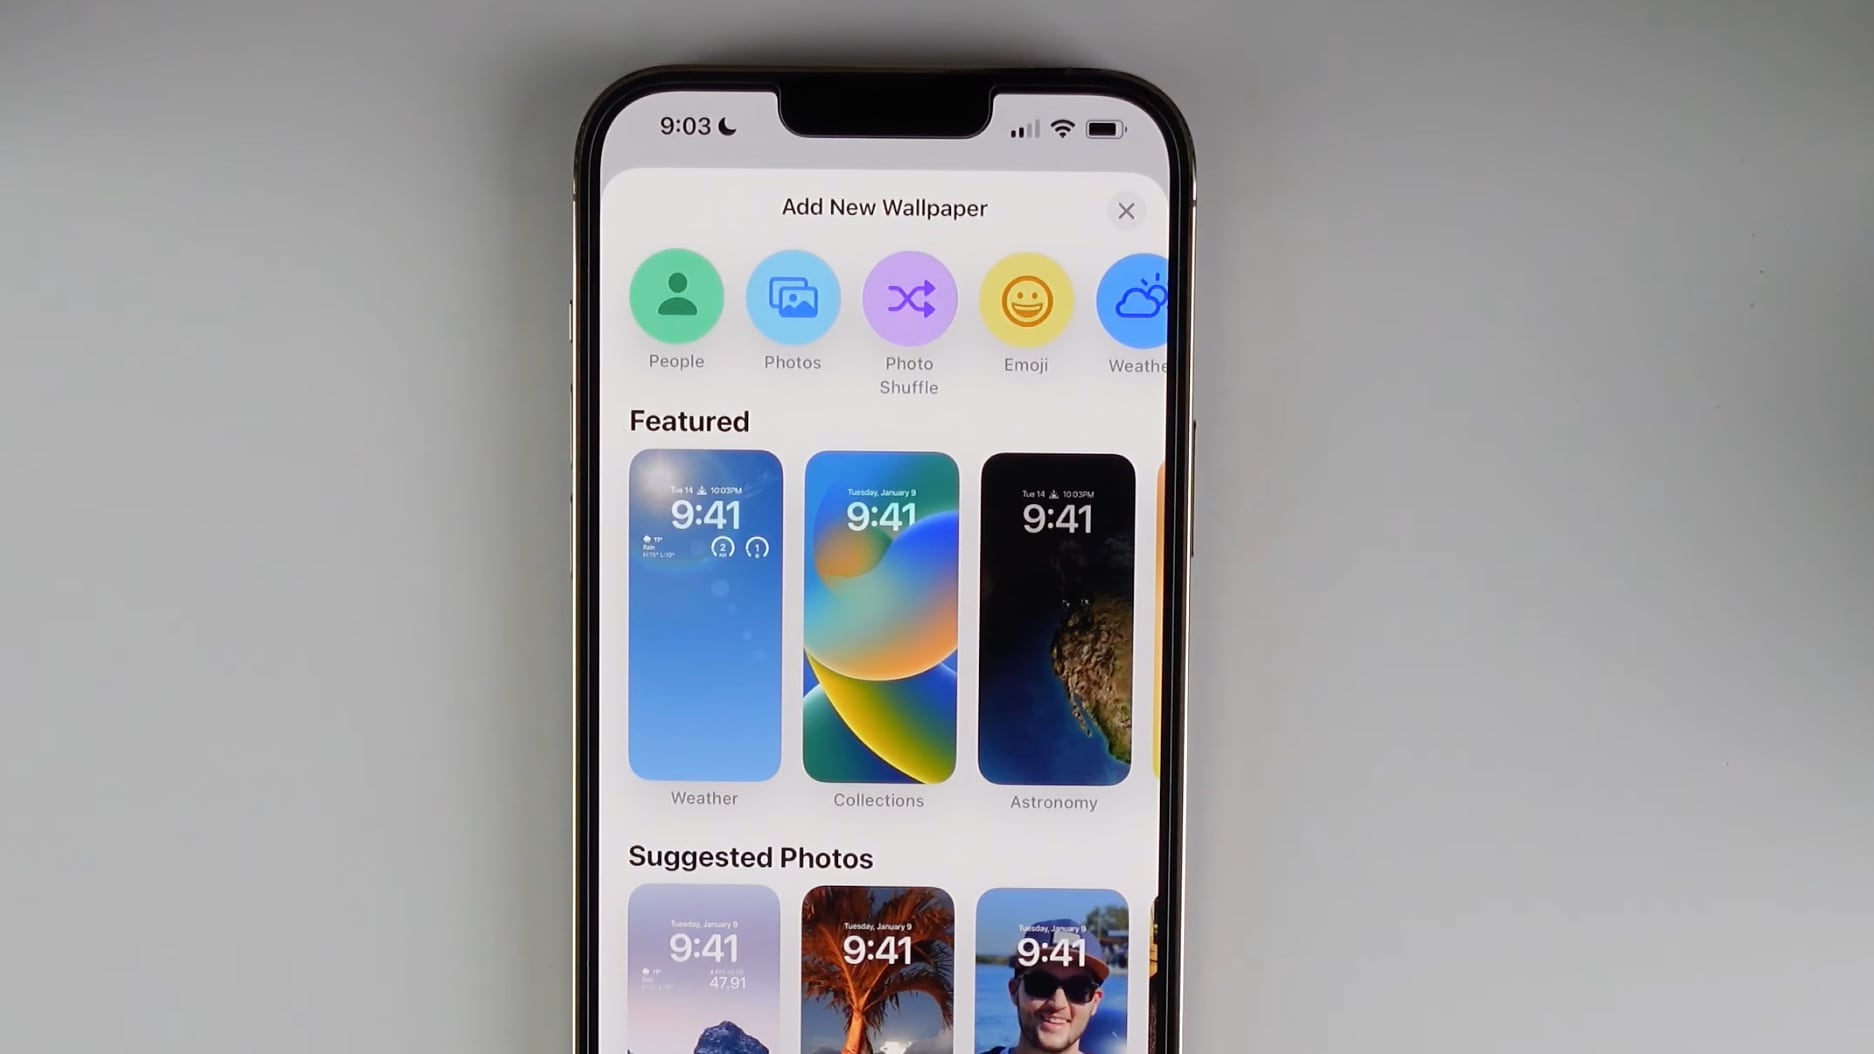 A still image from iDownloadBlog's video showcasing Apple's redesigned iPhone wallpaper experience in iOS 16